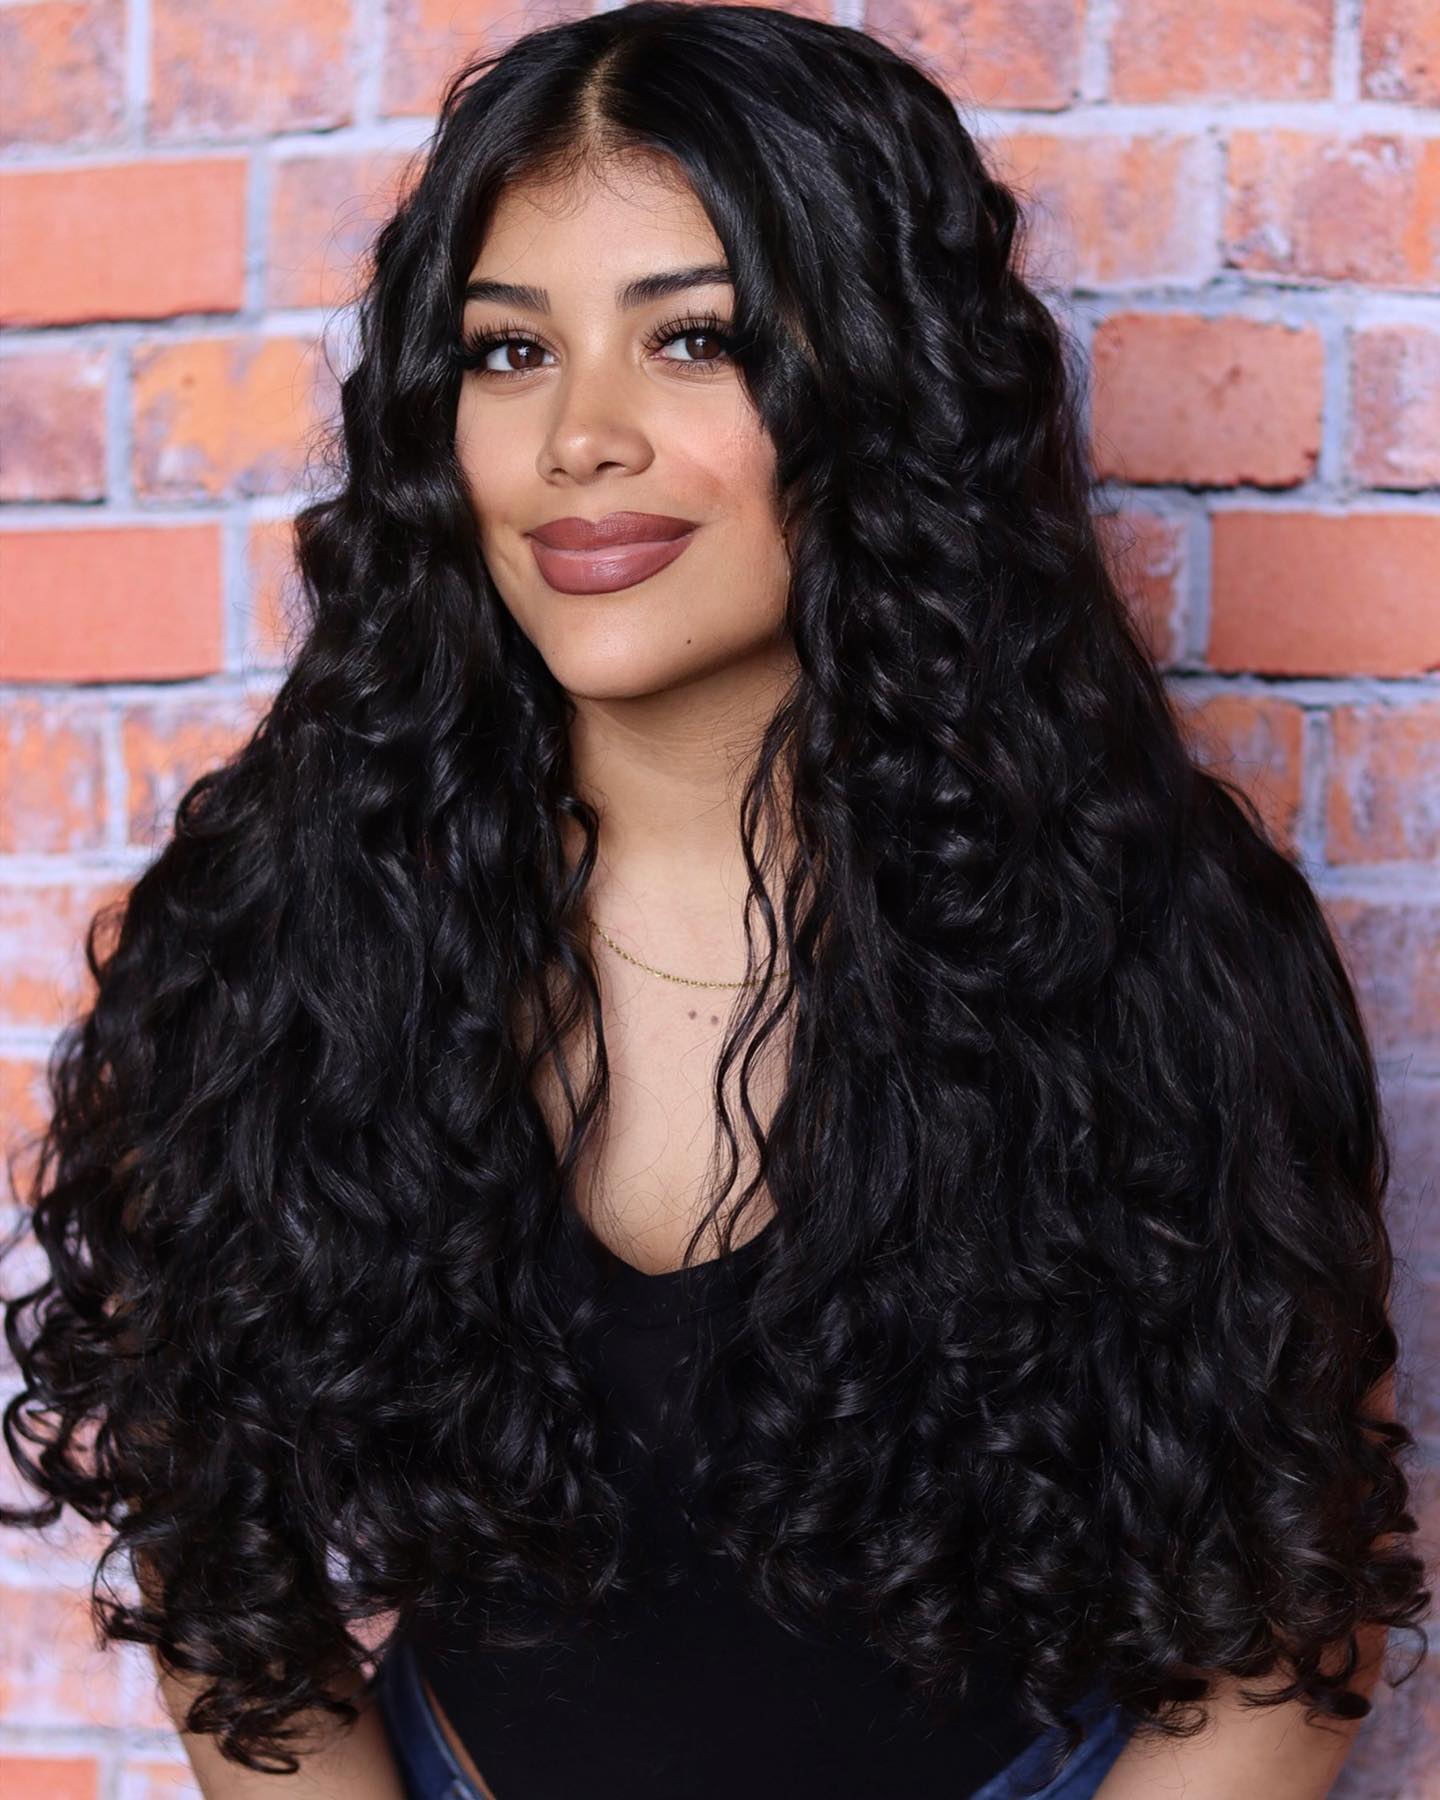 Long Curly Black Hairstyle for Heart-Shaped Face